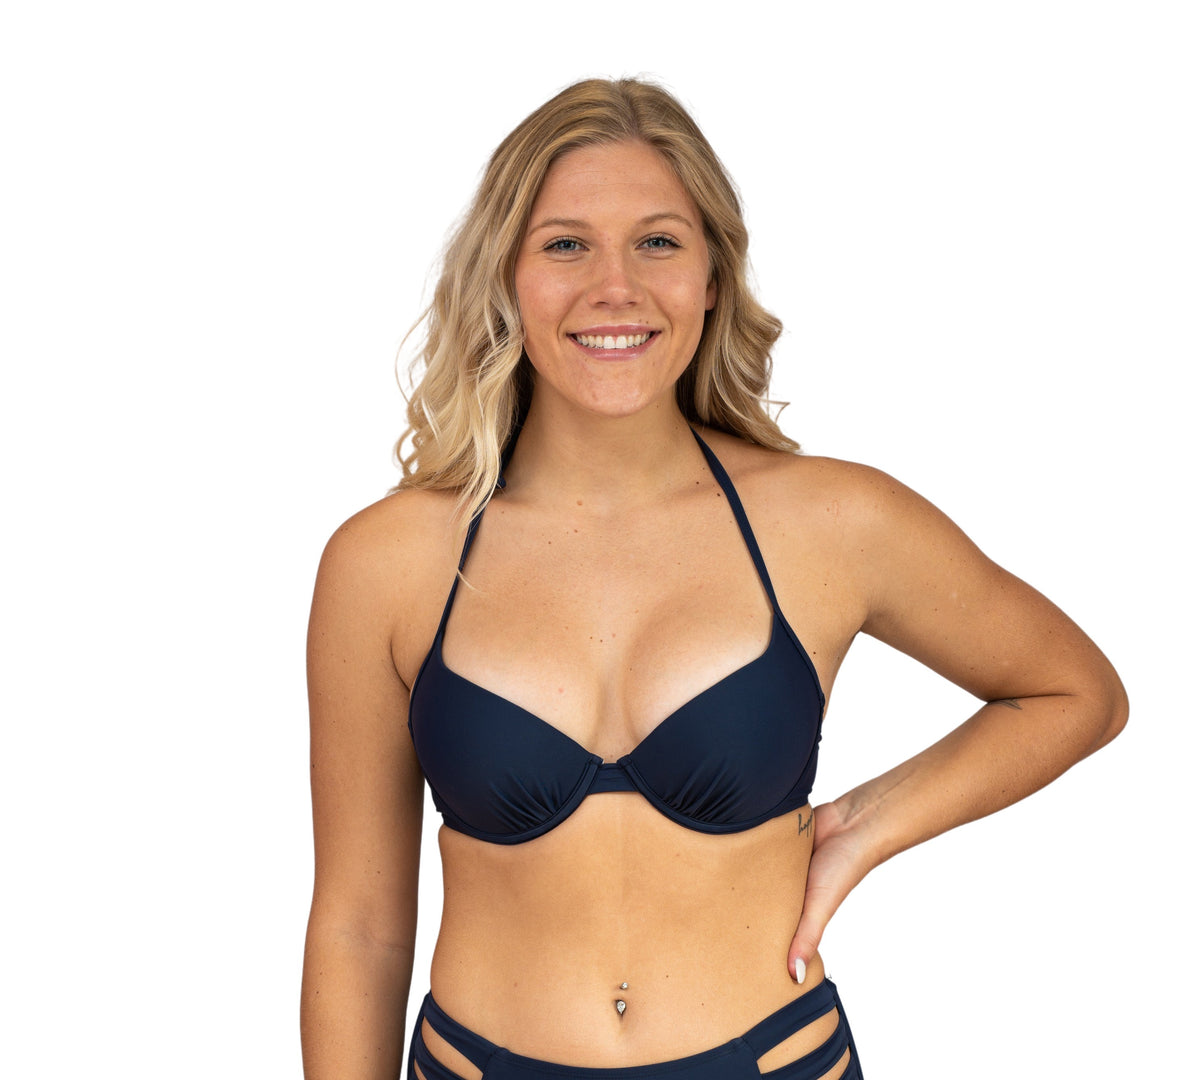 Underwire Padded Push Up Top